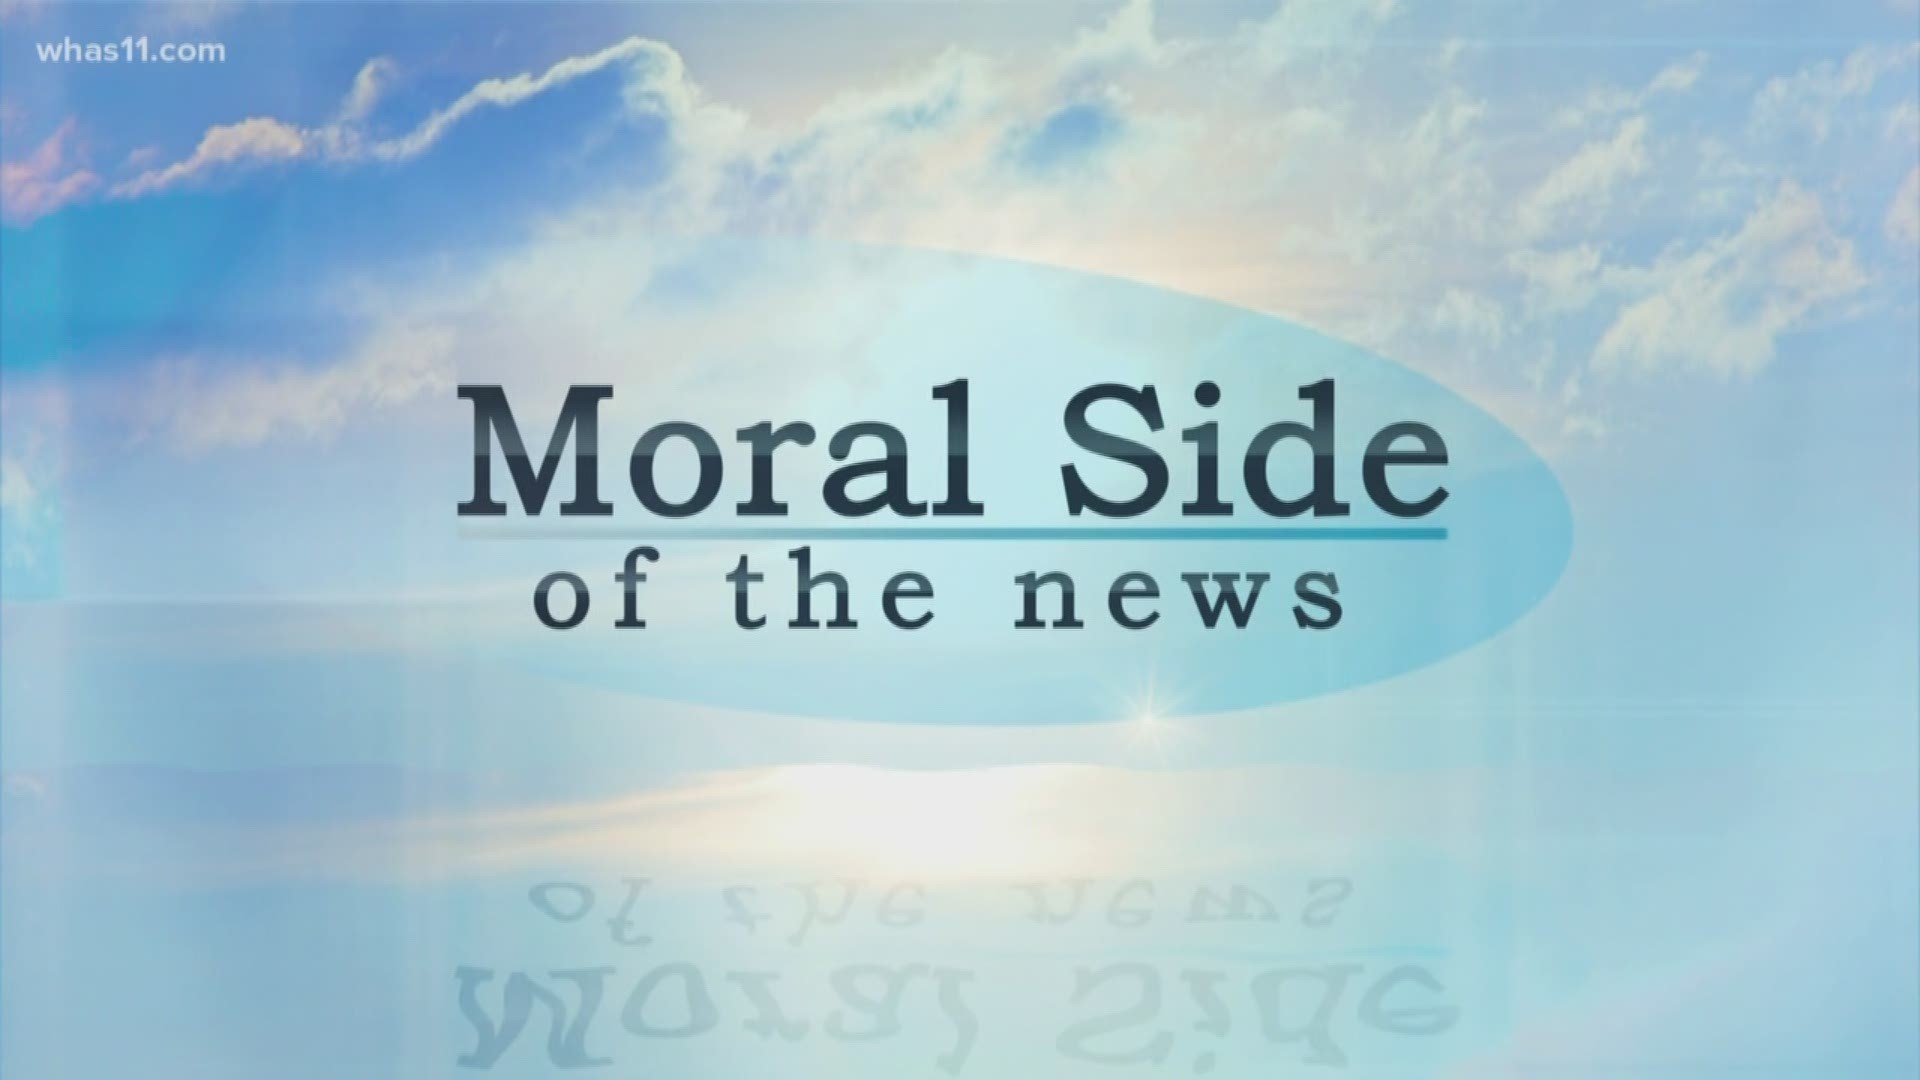 Moral Side of the News: Aug. 23, 2018